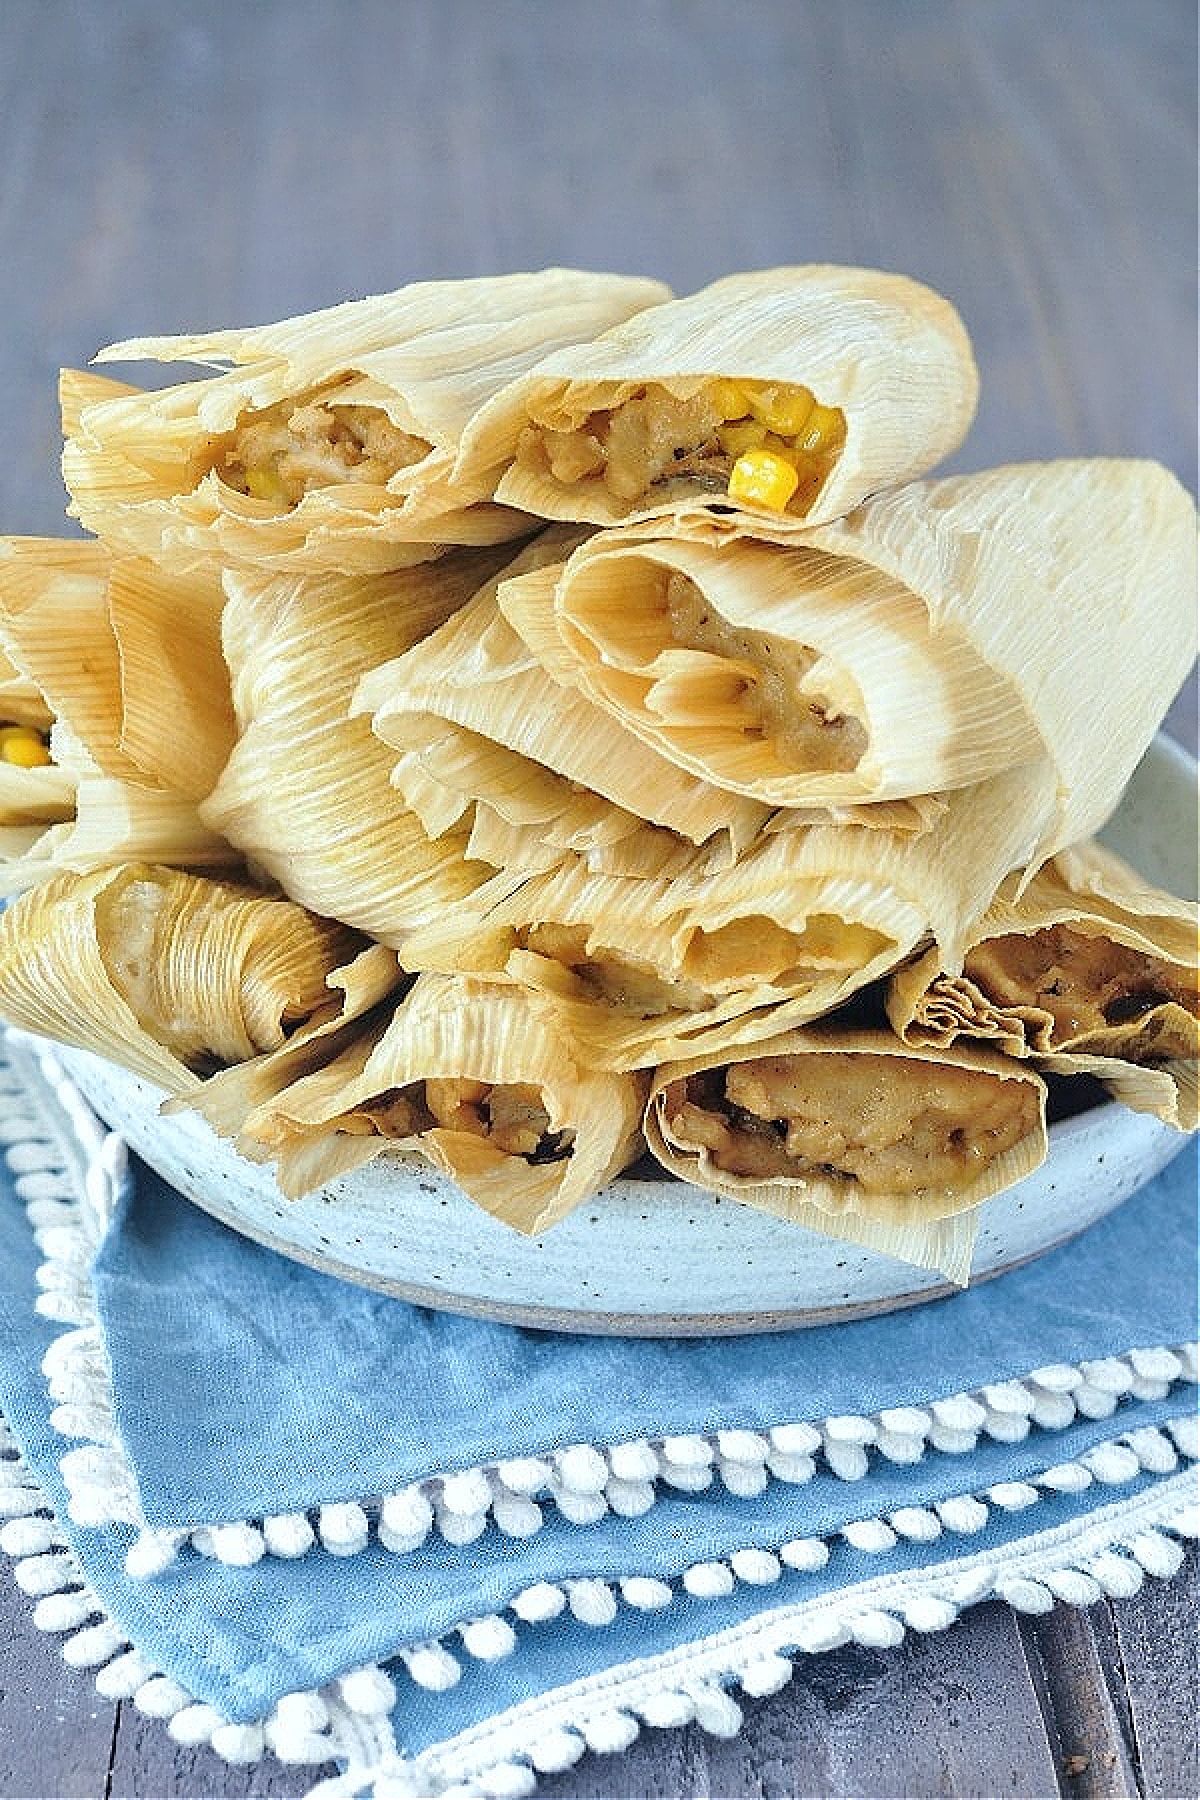 A plate of steamed vegan tamales wrapped in corn husks, stacked high in a shallow bowl sitting on a blue cloth napkin.